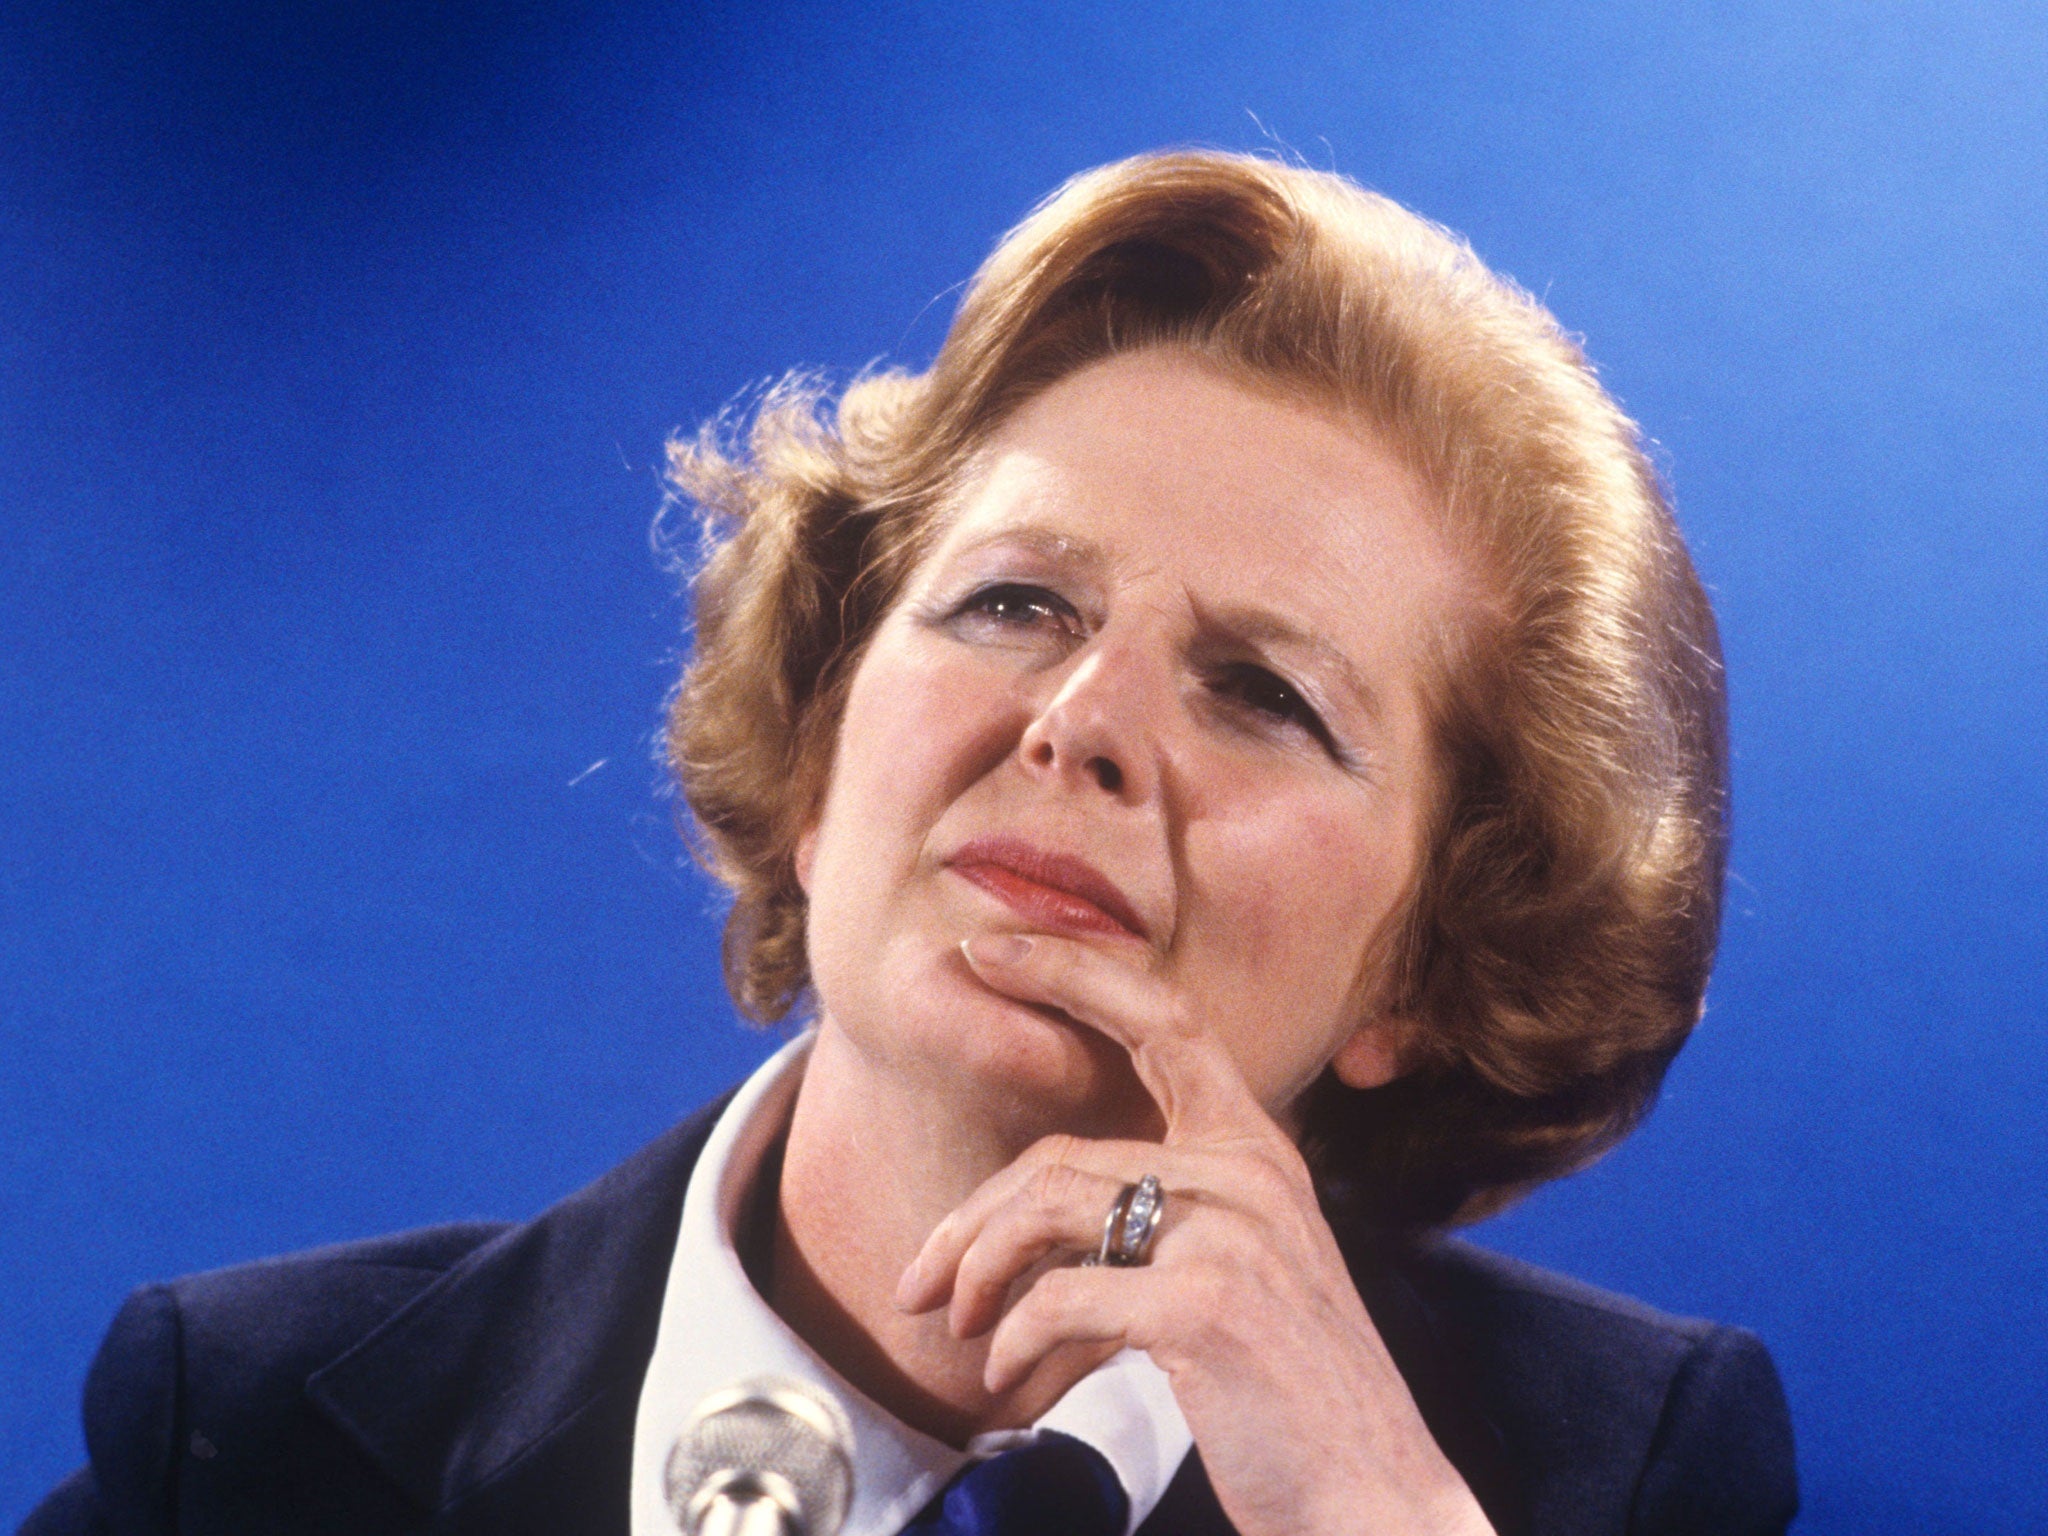 "Right up to the 1979 election, many Tories continued to see Thatcher as a walking electoral disaster. One commentator, warned that she would take her party in “an extremist, class-conscious, right wing direction” that would prevent the Tories winning for a decade."